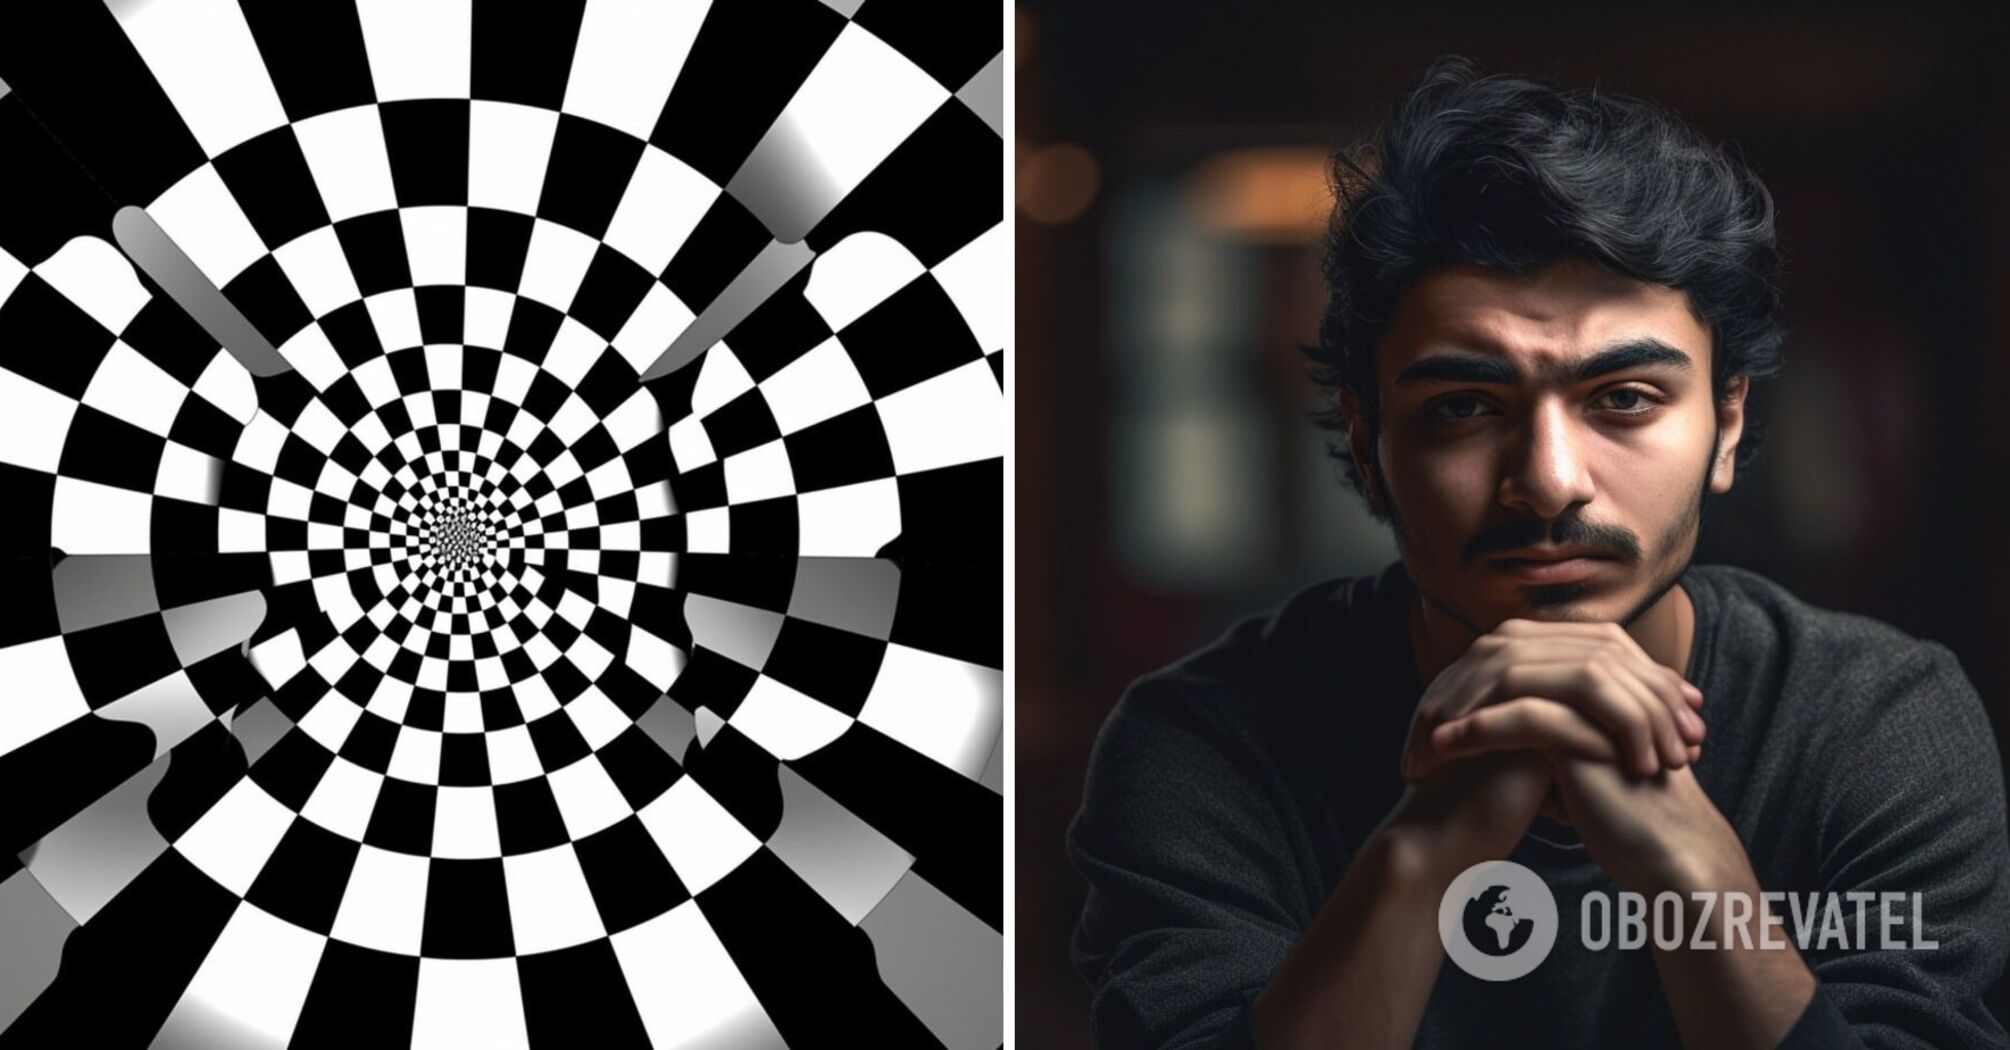 This optical illusion can show you the future – sort of